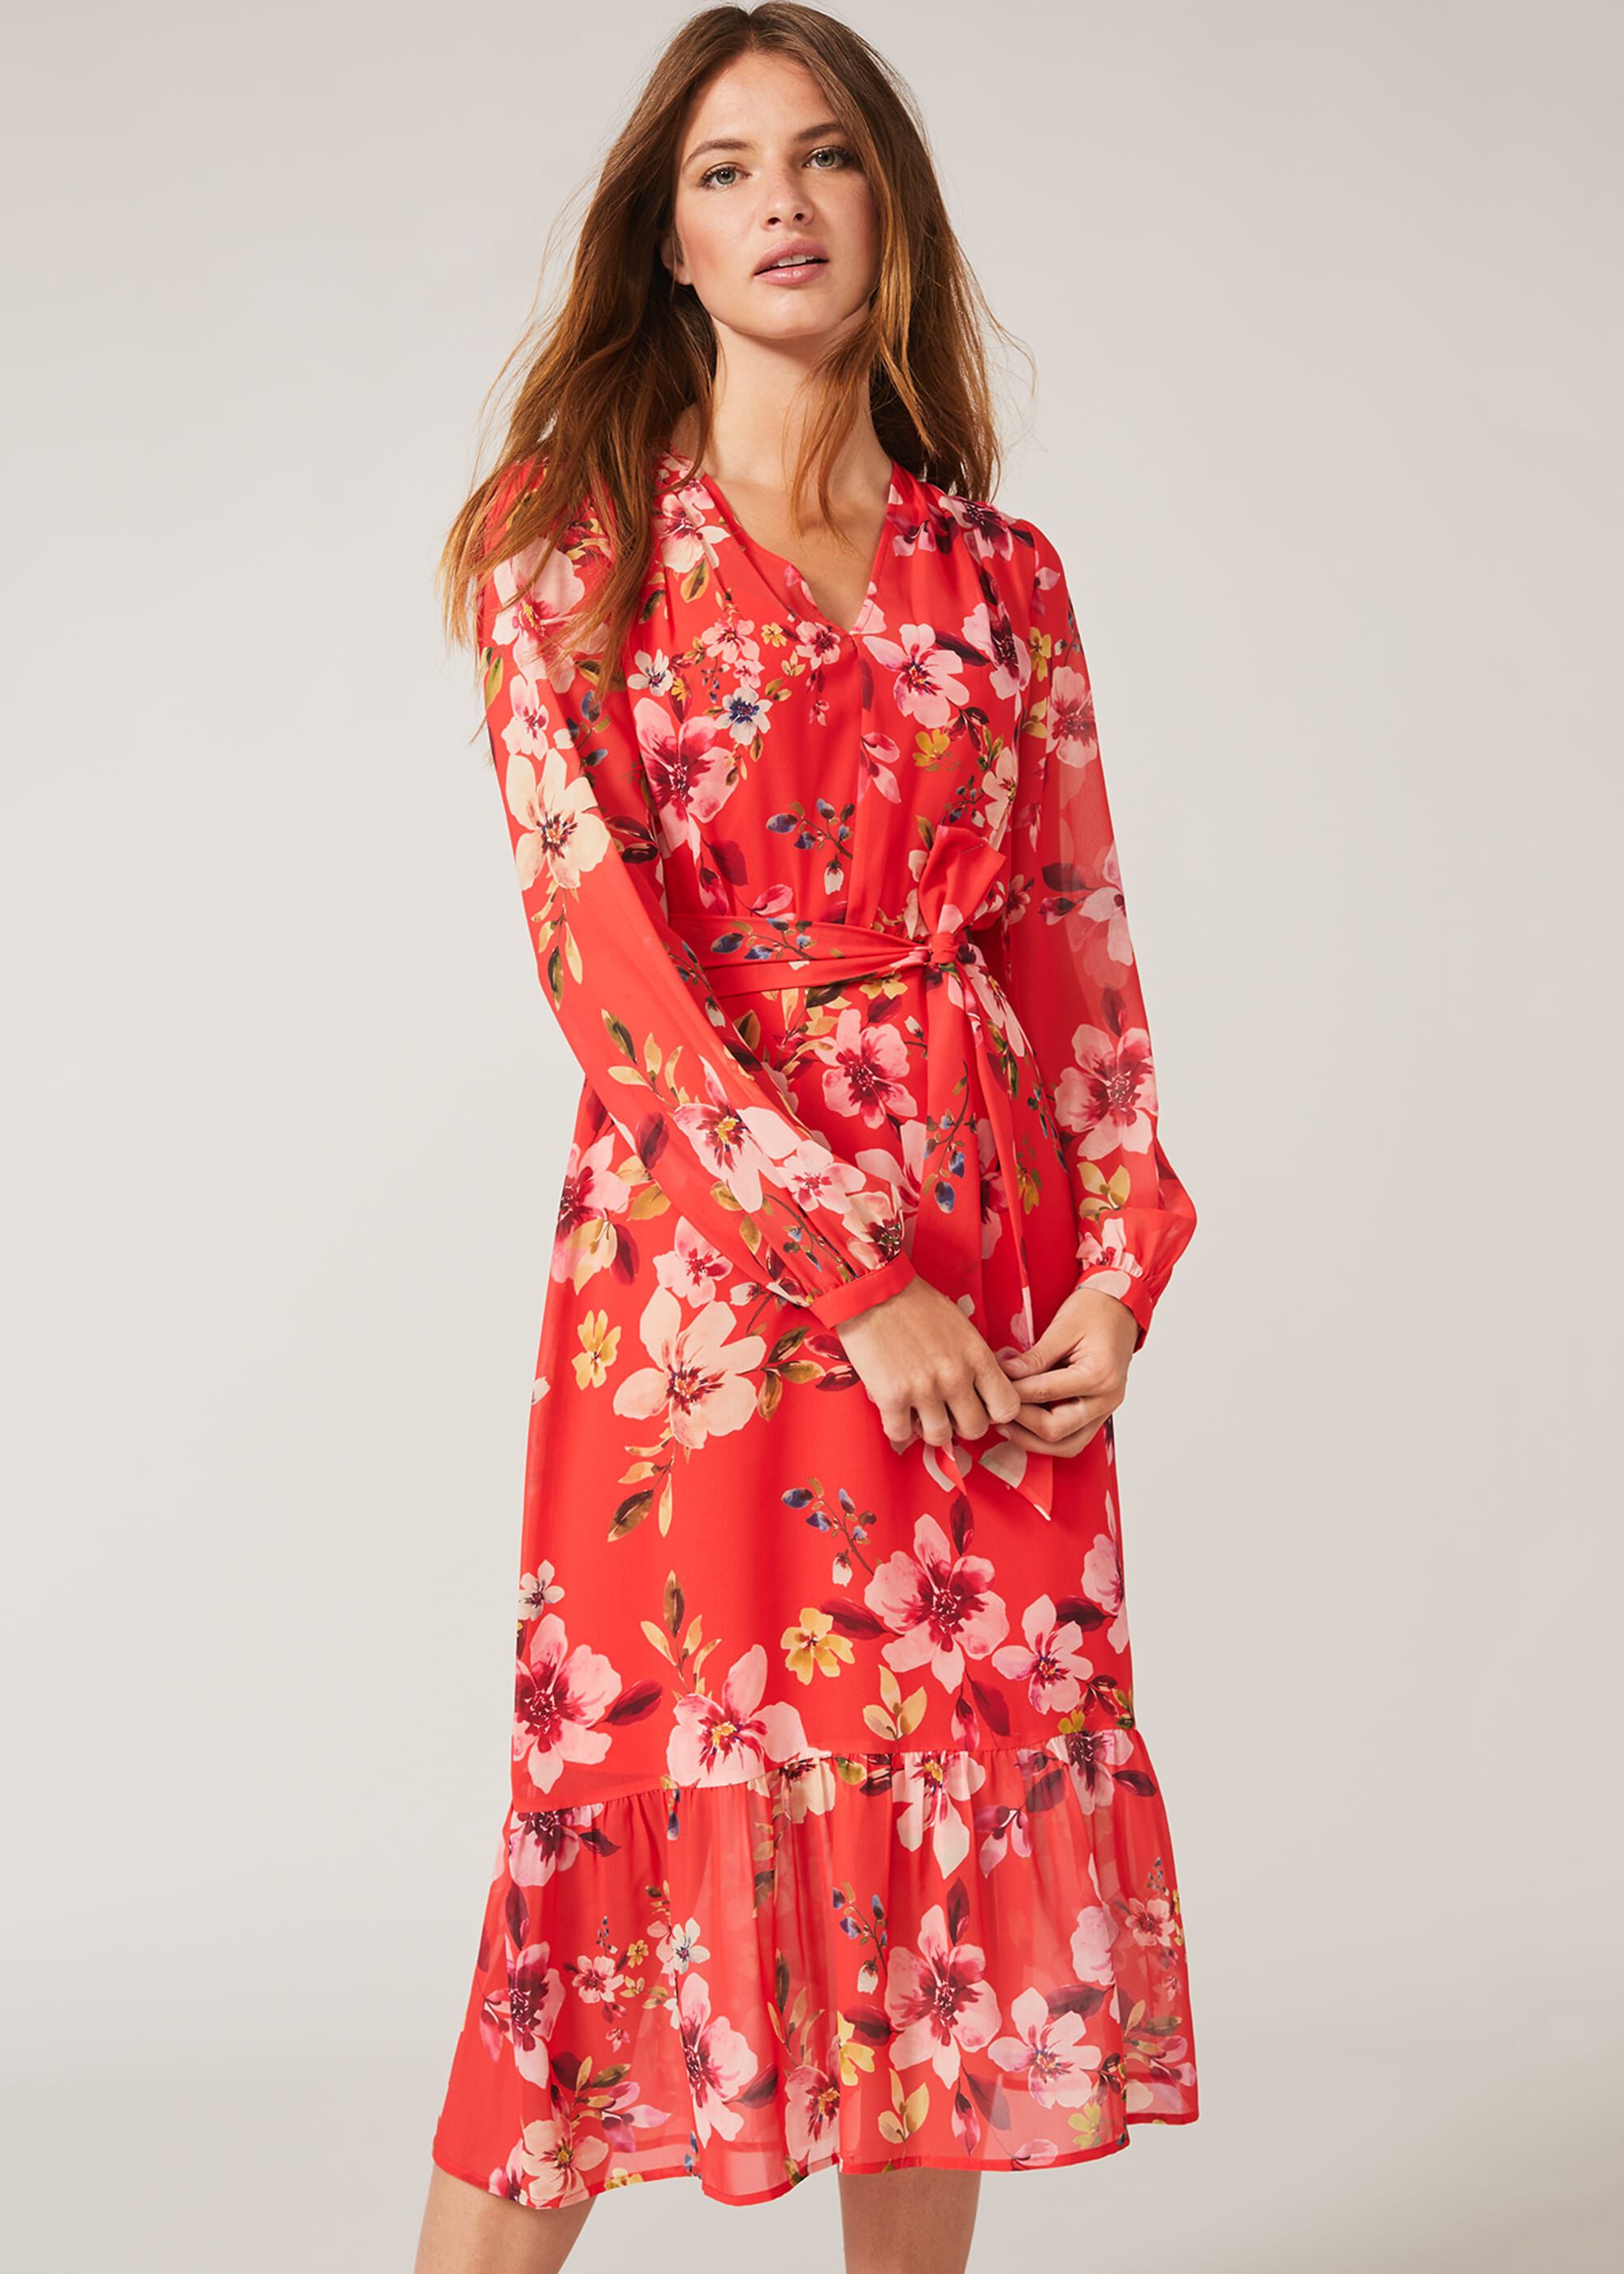 Phase Eight Chiffon Dress Flash Sales, UP TO 50% OFF | www.loop-cn.com